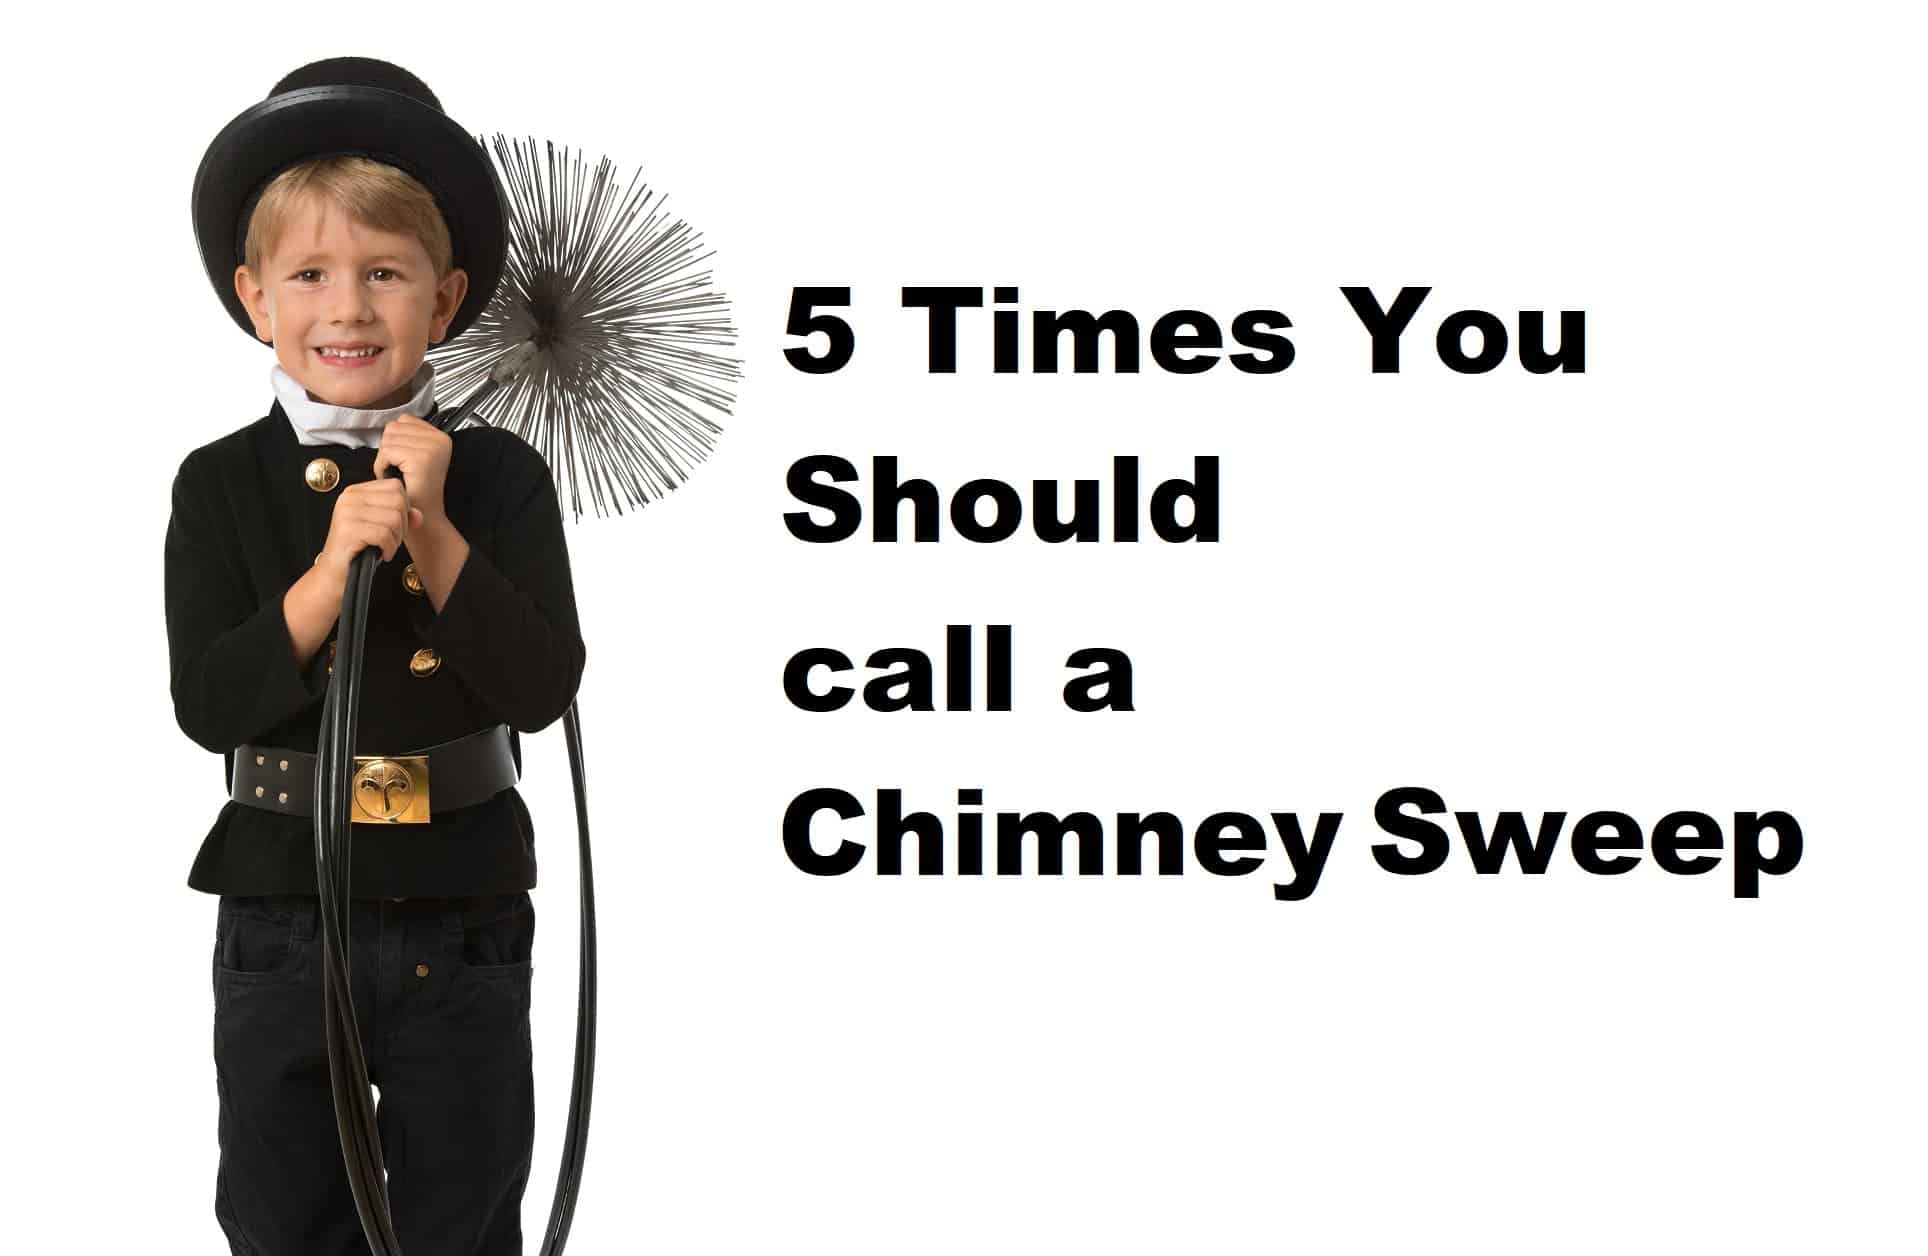 5 Times You Should Call a Chimney Sweep